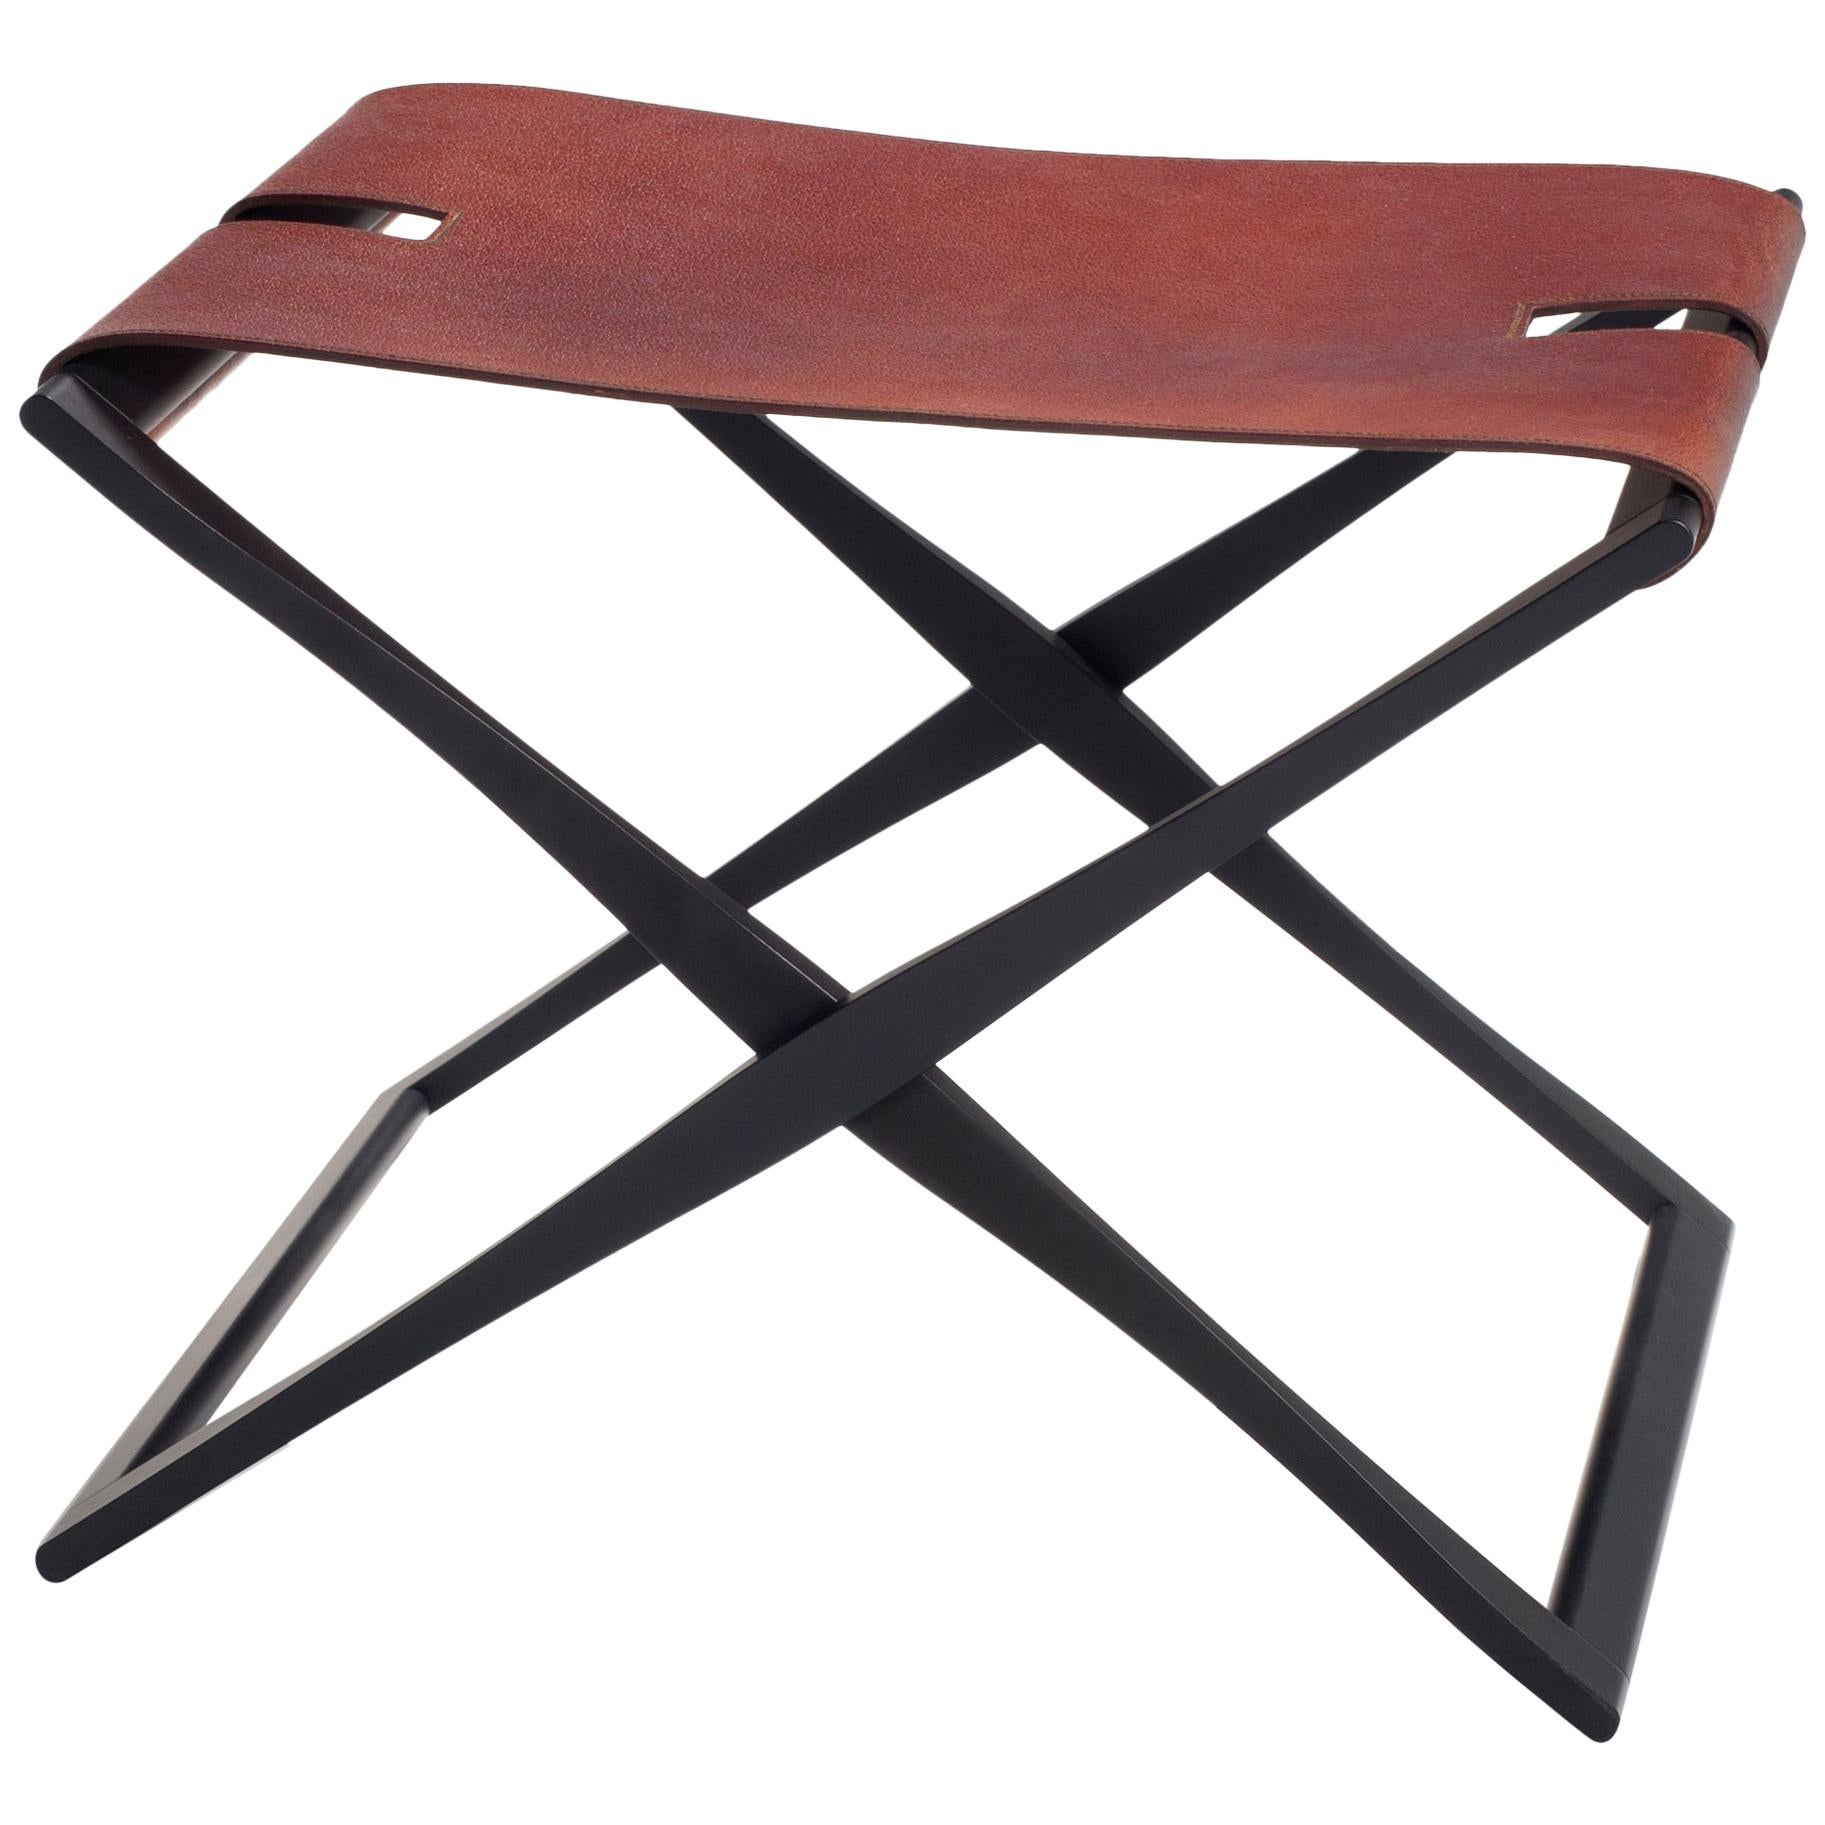 HOLLY HUNT Rover Folding Stool in Anodized Aluminium and Cordovan Rover Leather